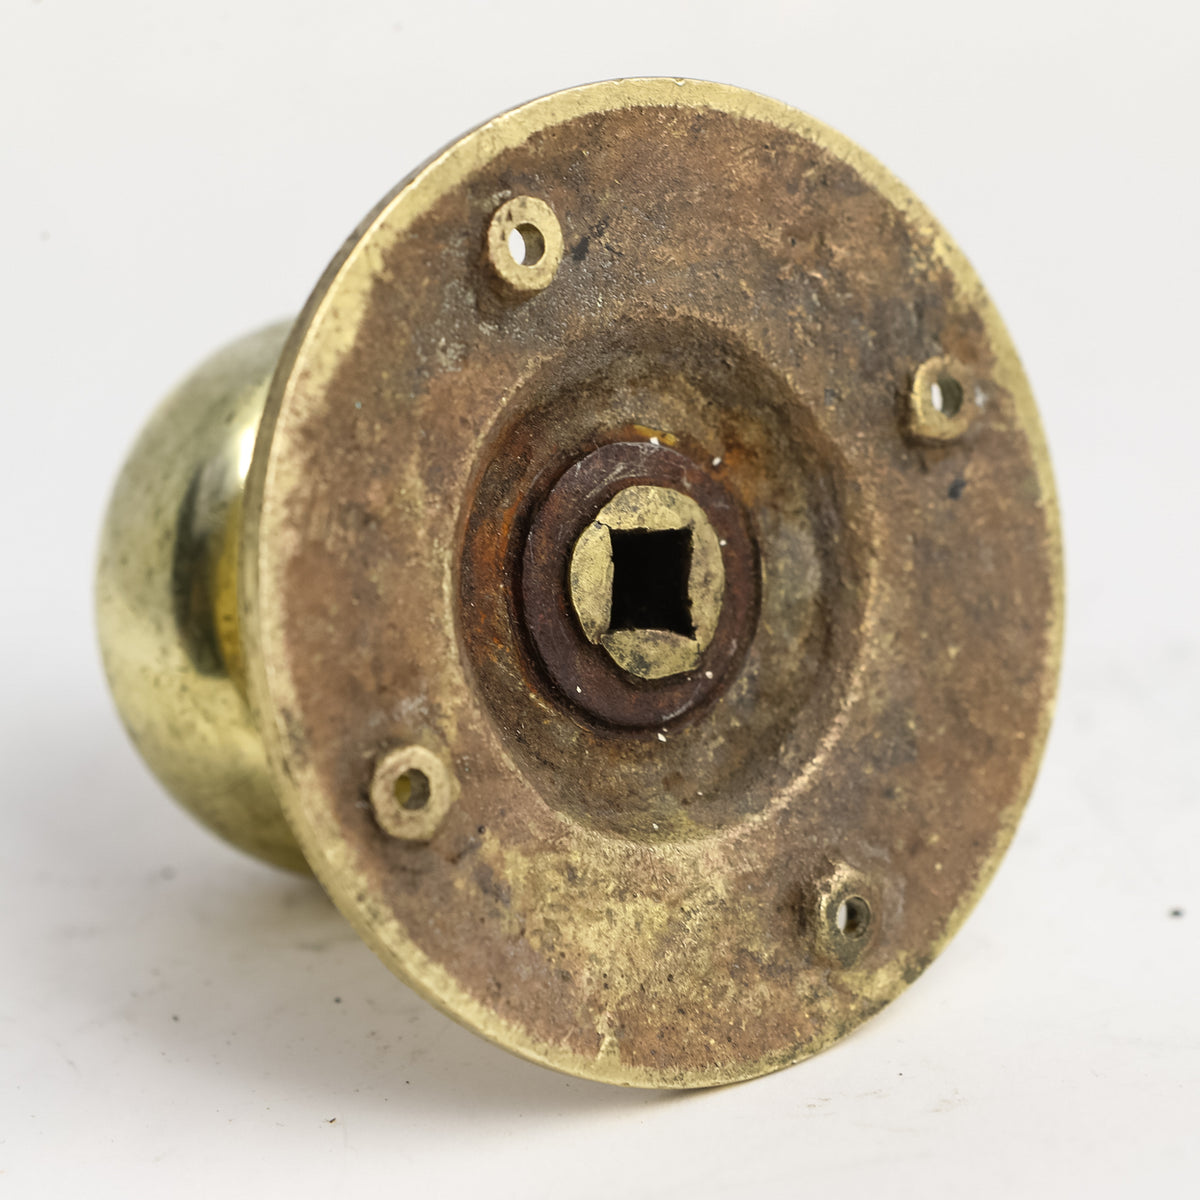 Reclaimed Antique Solid Brass Door Knob | The Architectural Forum